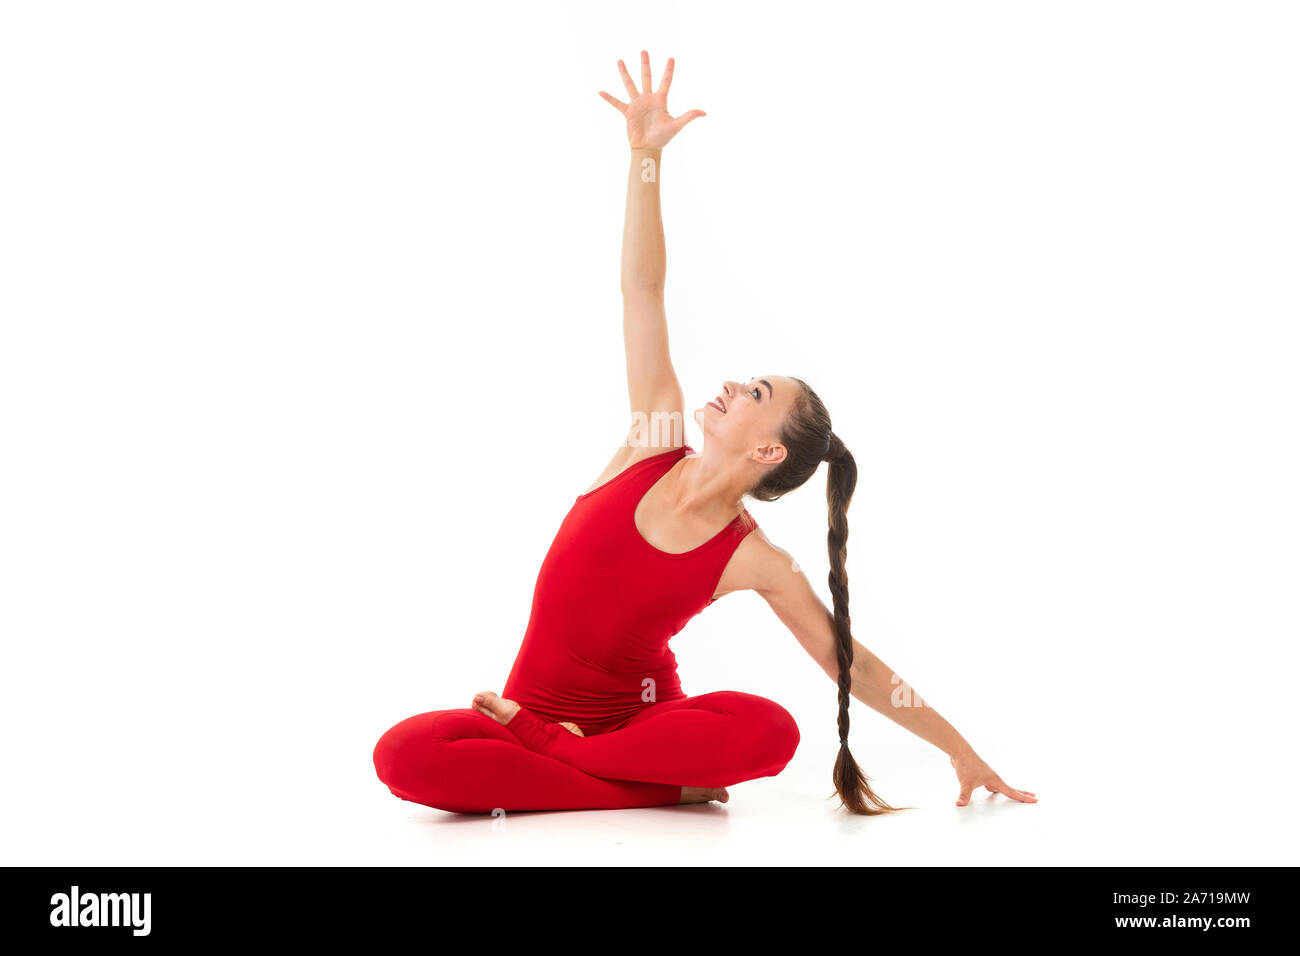 young woman meditation in a yoga pose Stock Photo